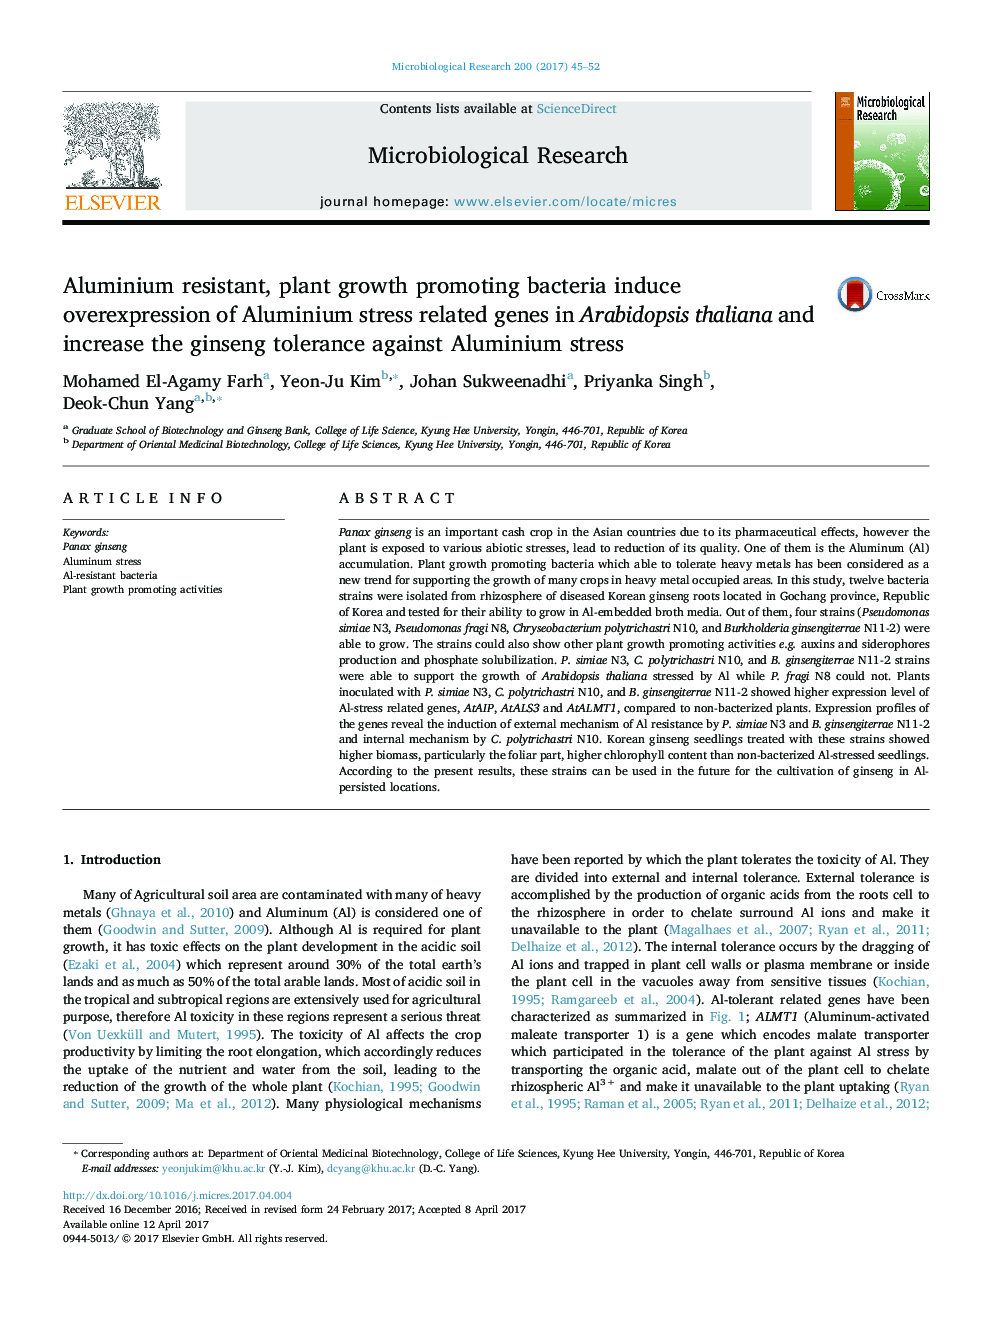 Aluminium resistant, plant growth promoting bacteria induce overexpression of Aluminium stress related genes in Arabidopsis thaliana and increase the ginseng tolerance against Aluminium stress